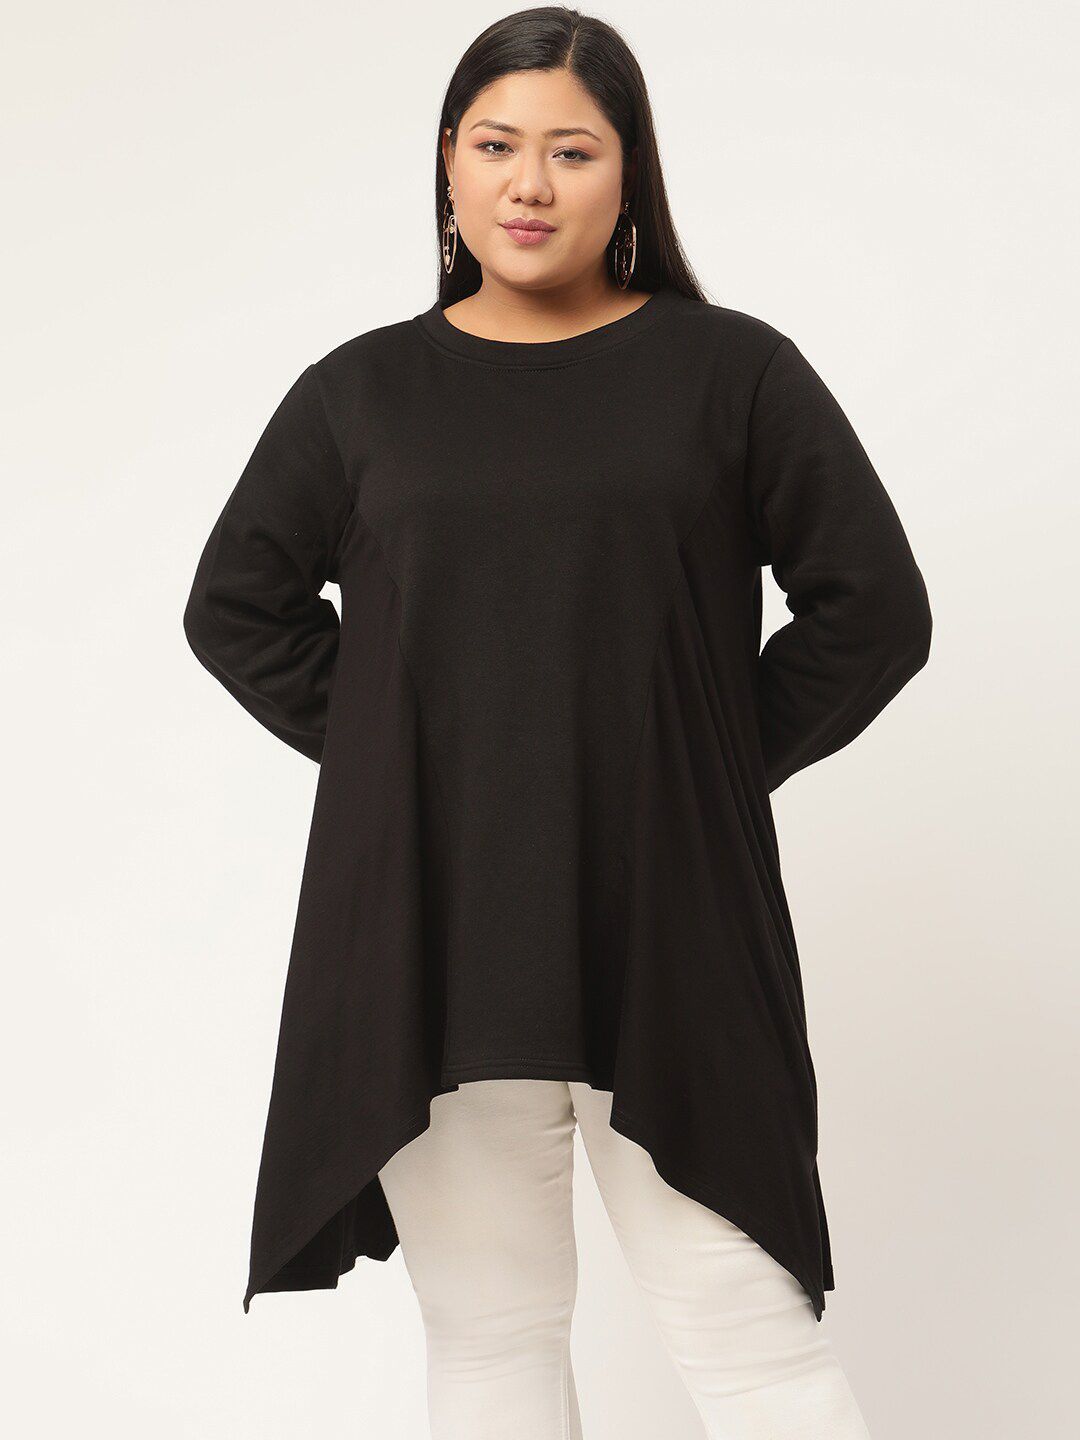 theRebelinme Black High-Low Plus Size Longline Top Price in India